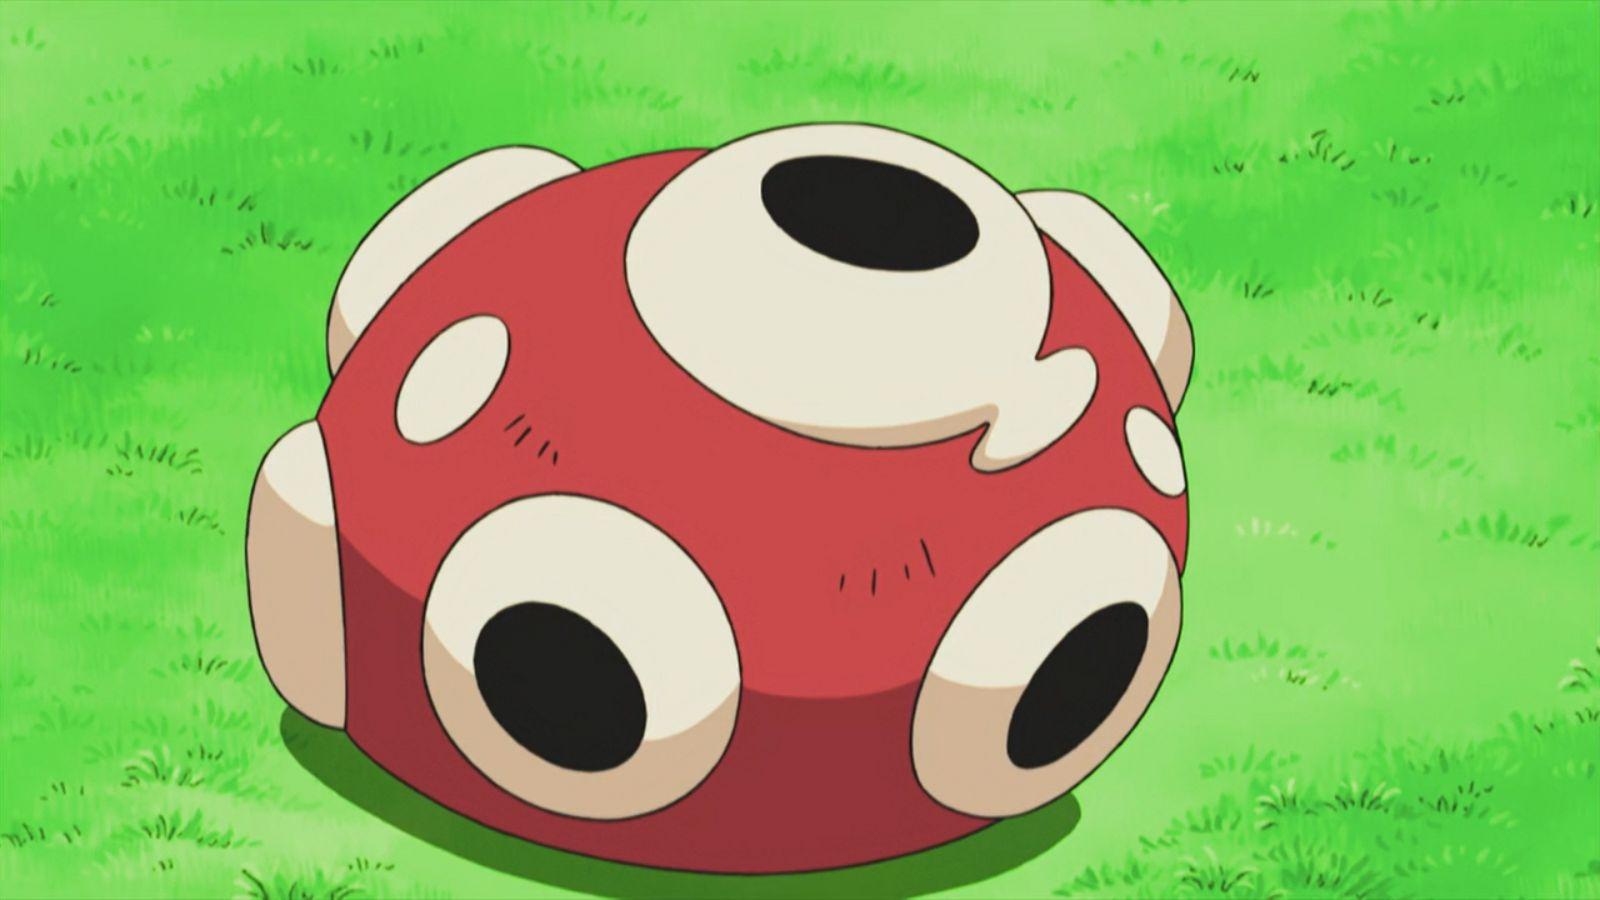 Shuckle shell from Pokemon anime.